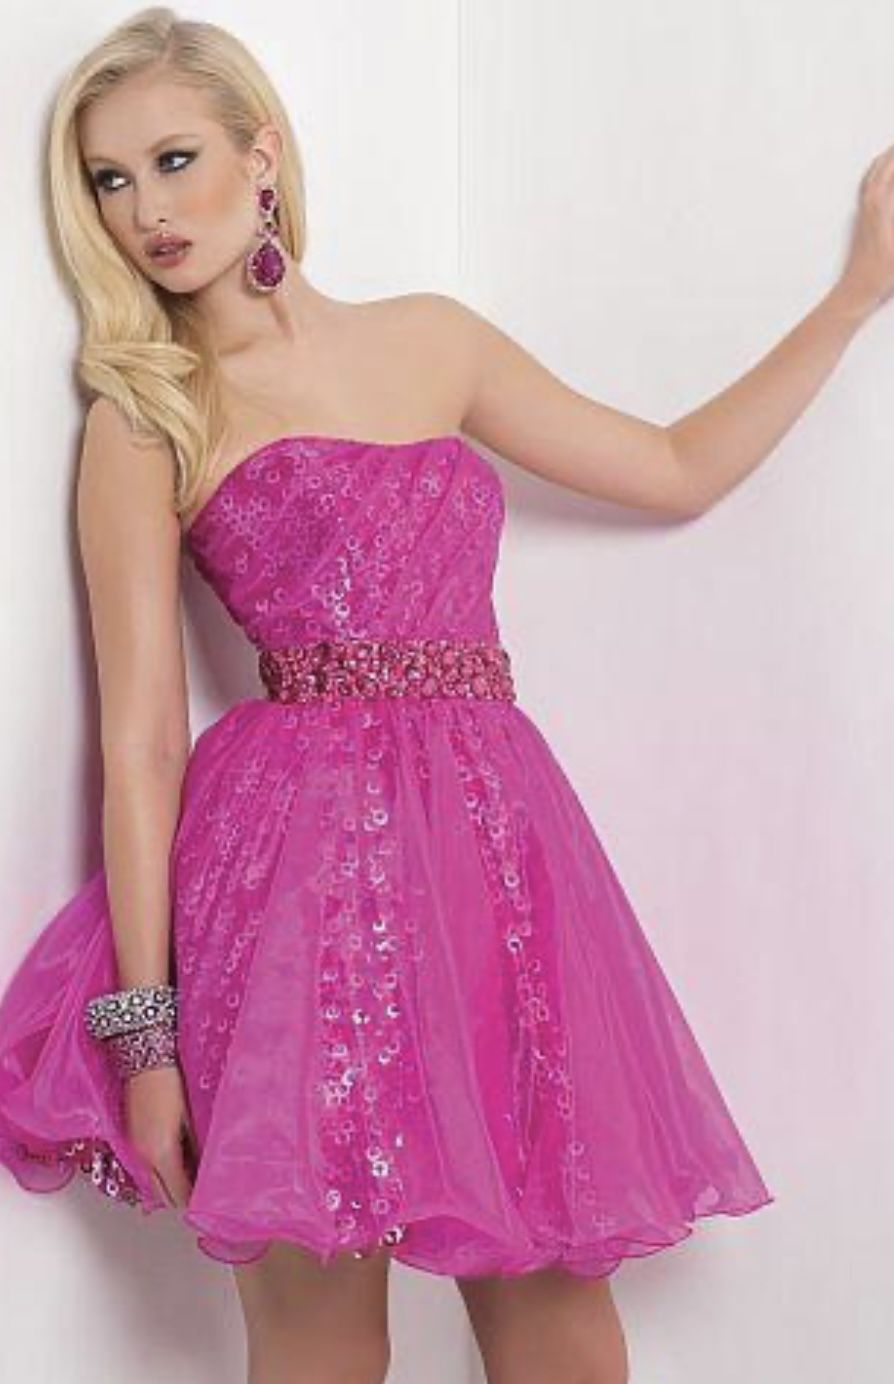 New With Tags Size 6 Blush Prom Homecoming Dress & Short Formal Dress $65